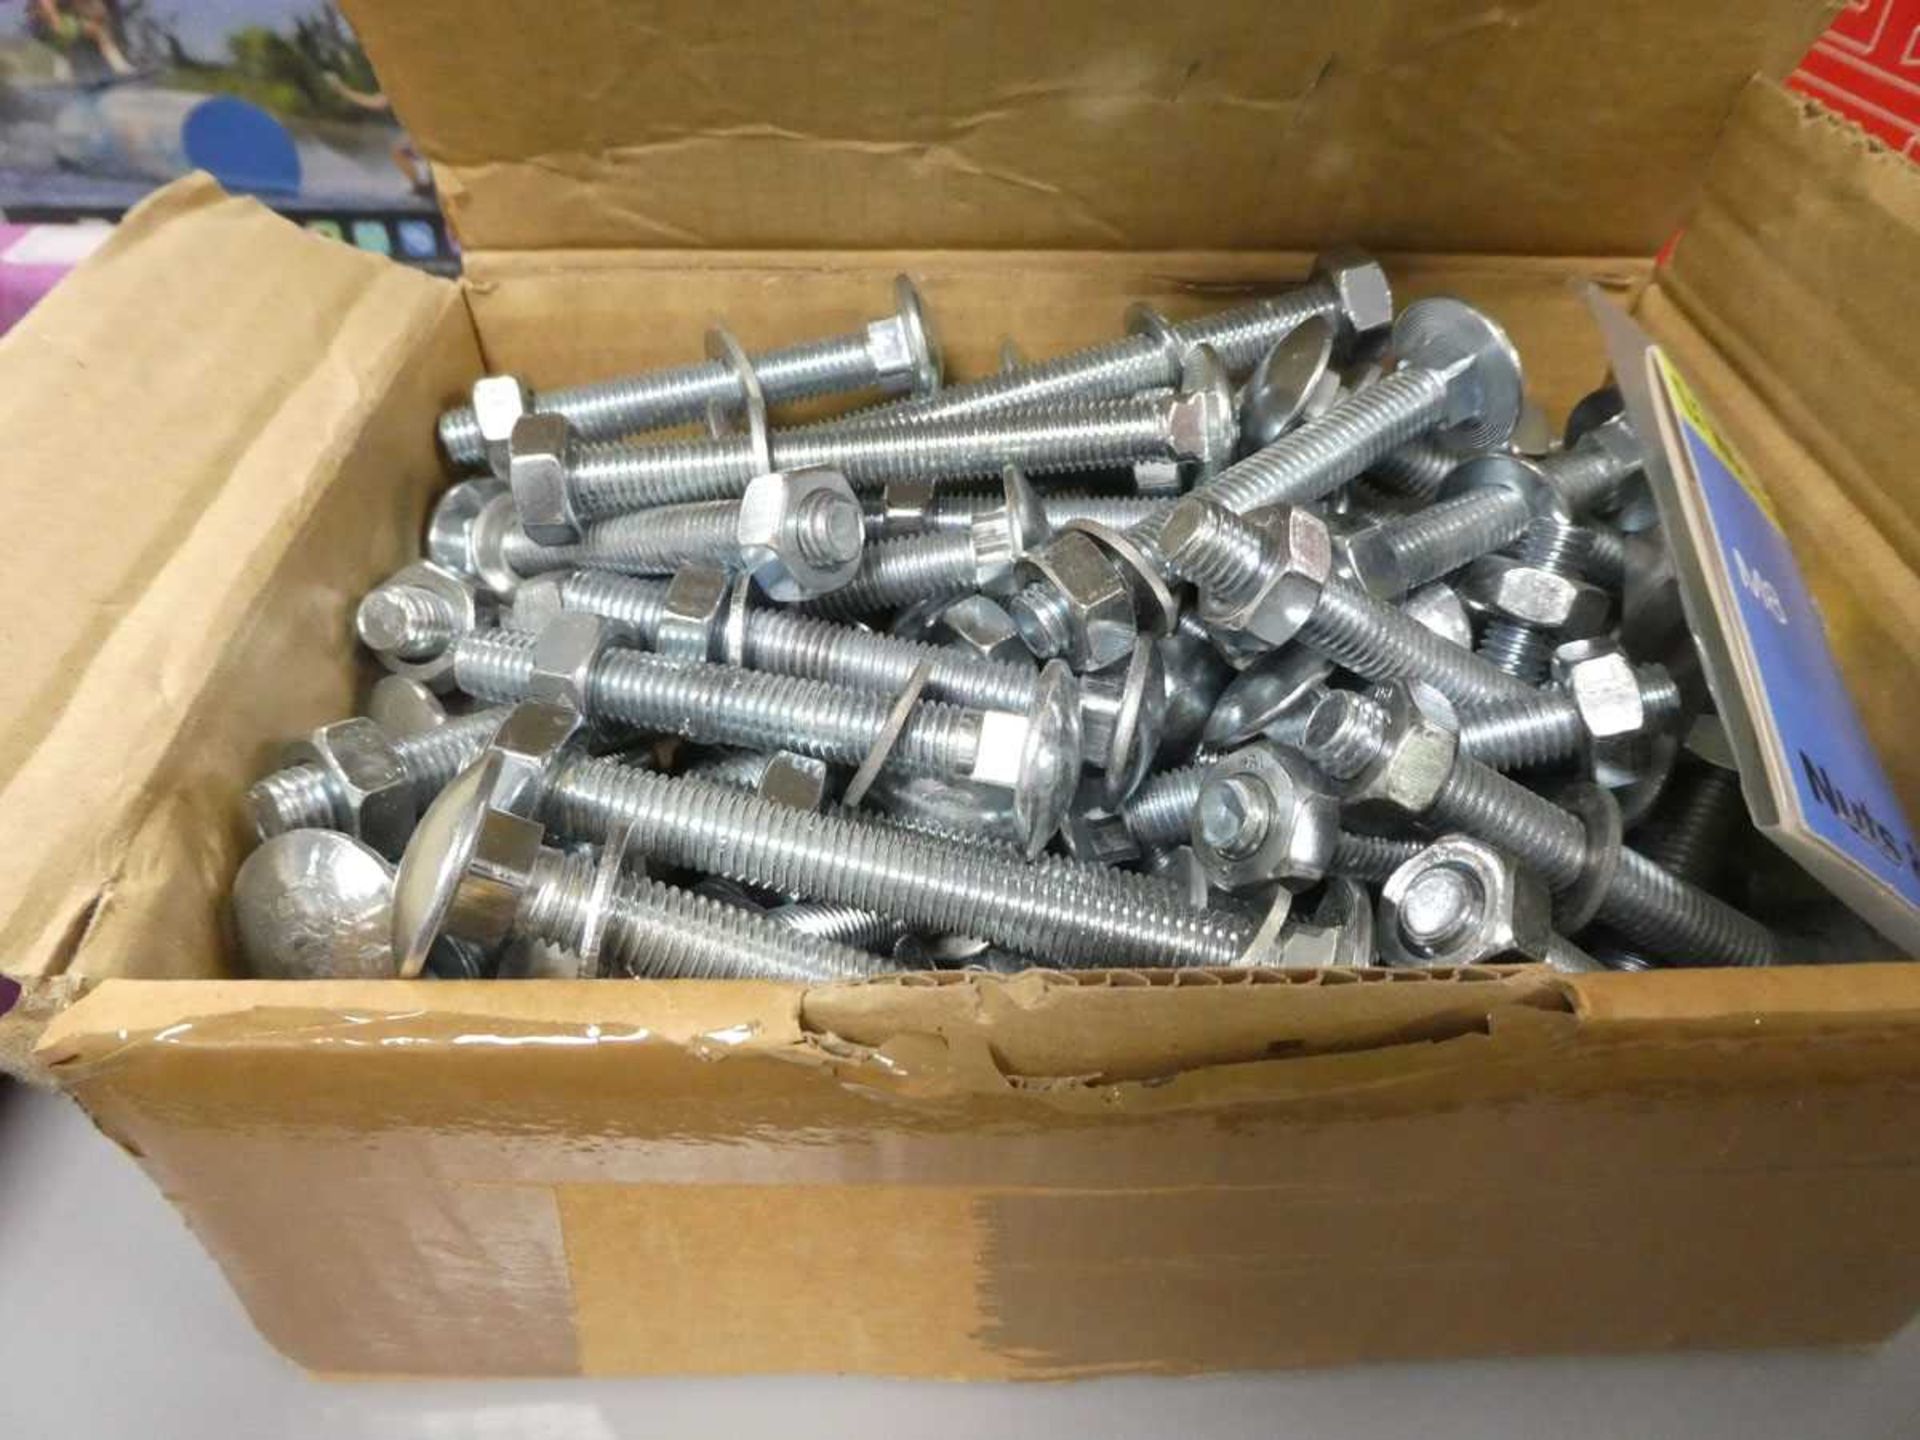 Box containing various nuts, bolts and washers